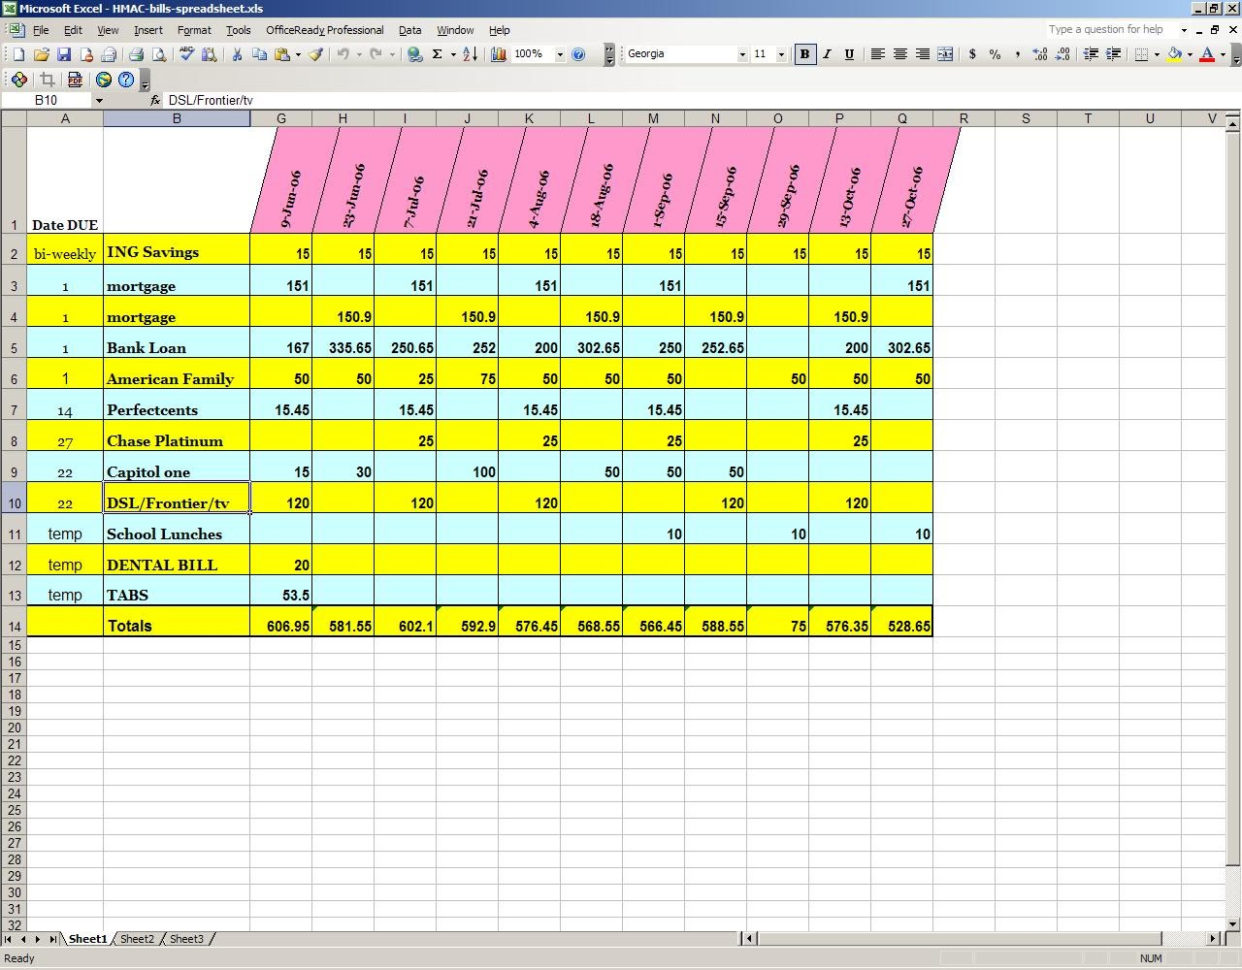 Excel Spreadsheet For Bill Tracking Spreadsheet Downloa excel